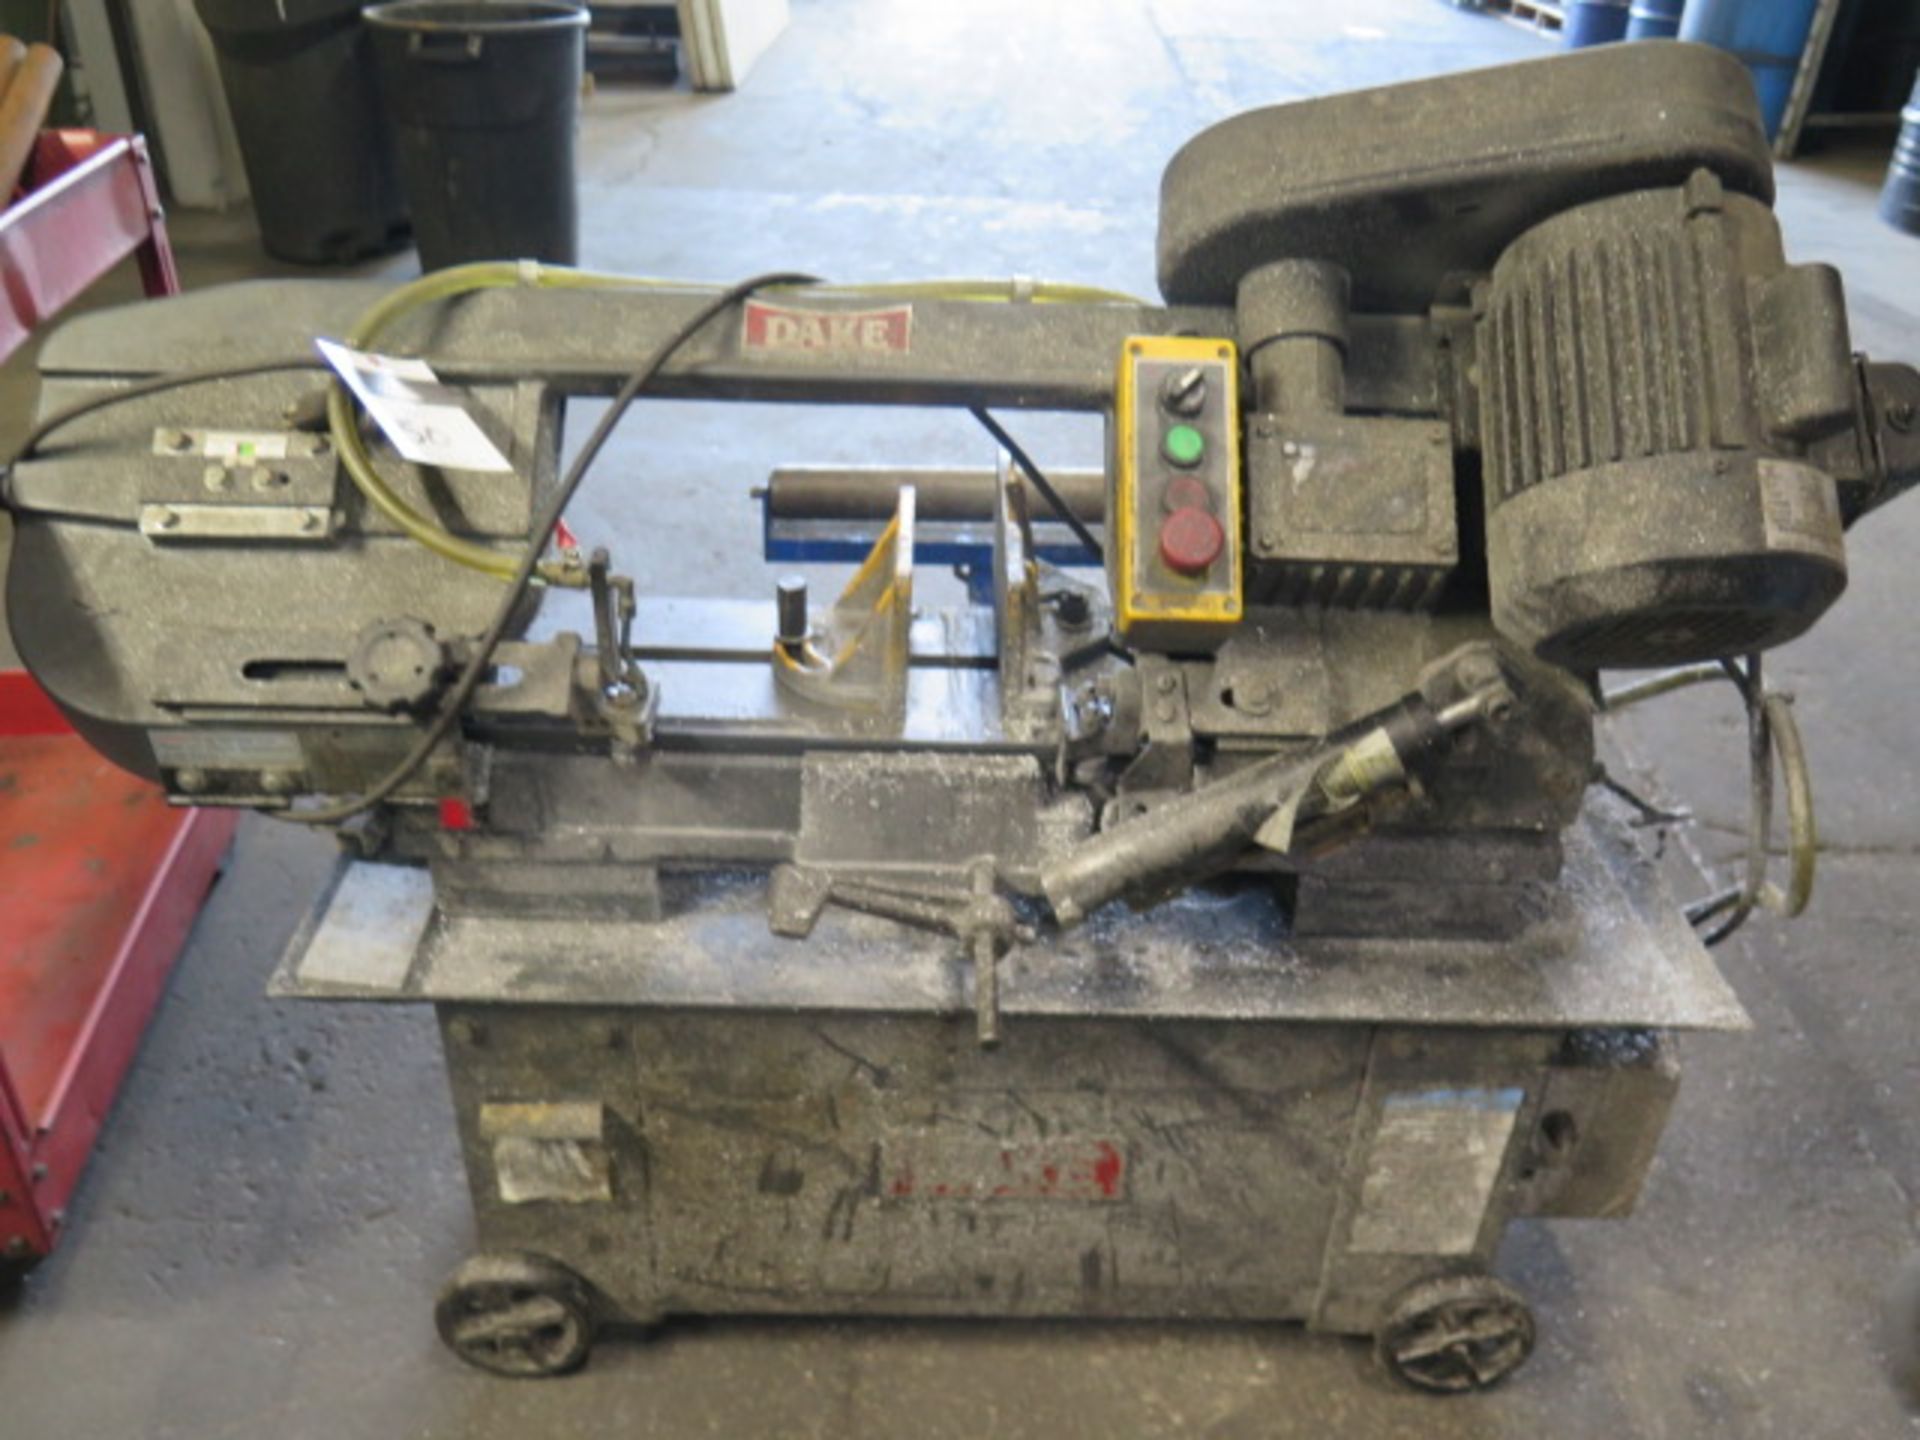 Dake 7” Horizontal Band Saw w/ Manual Clamping, Work Stop, Coolant (SOLD AS-IS - NO WARRANTY)